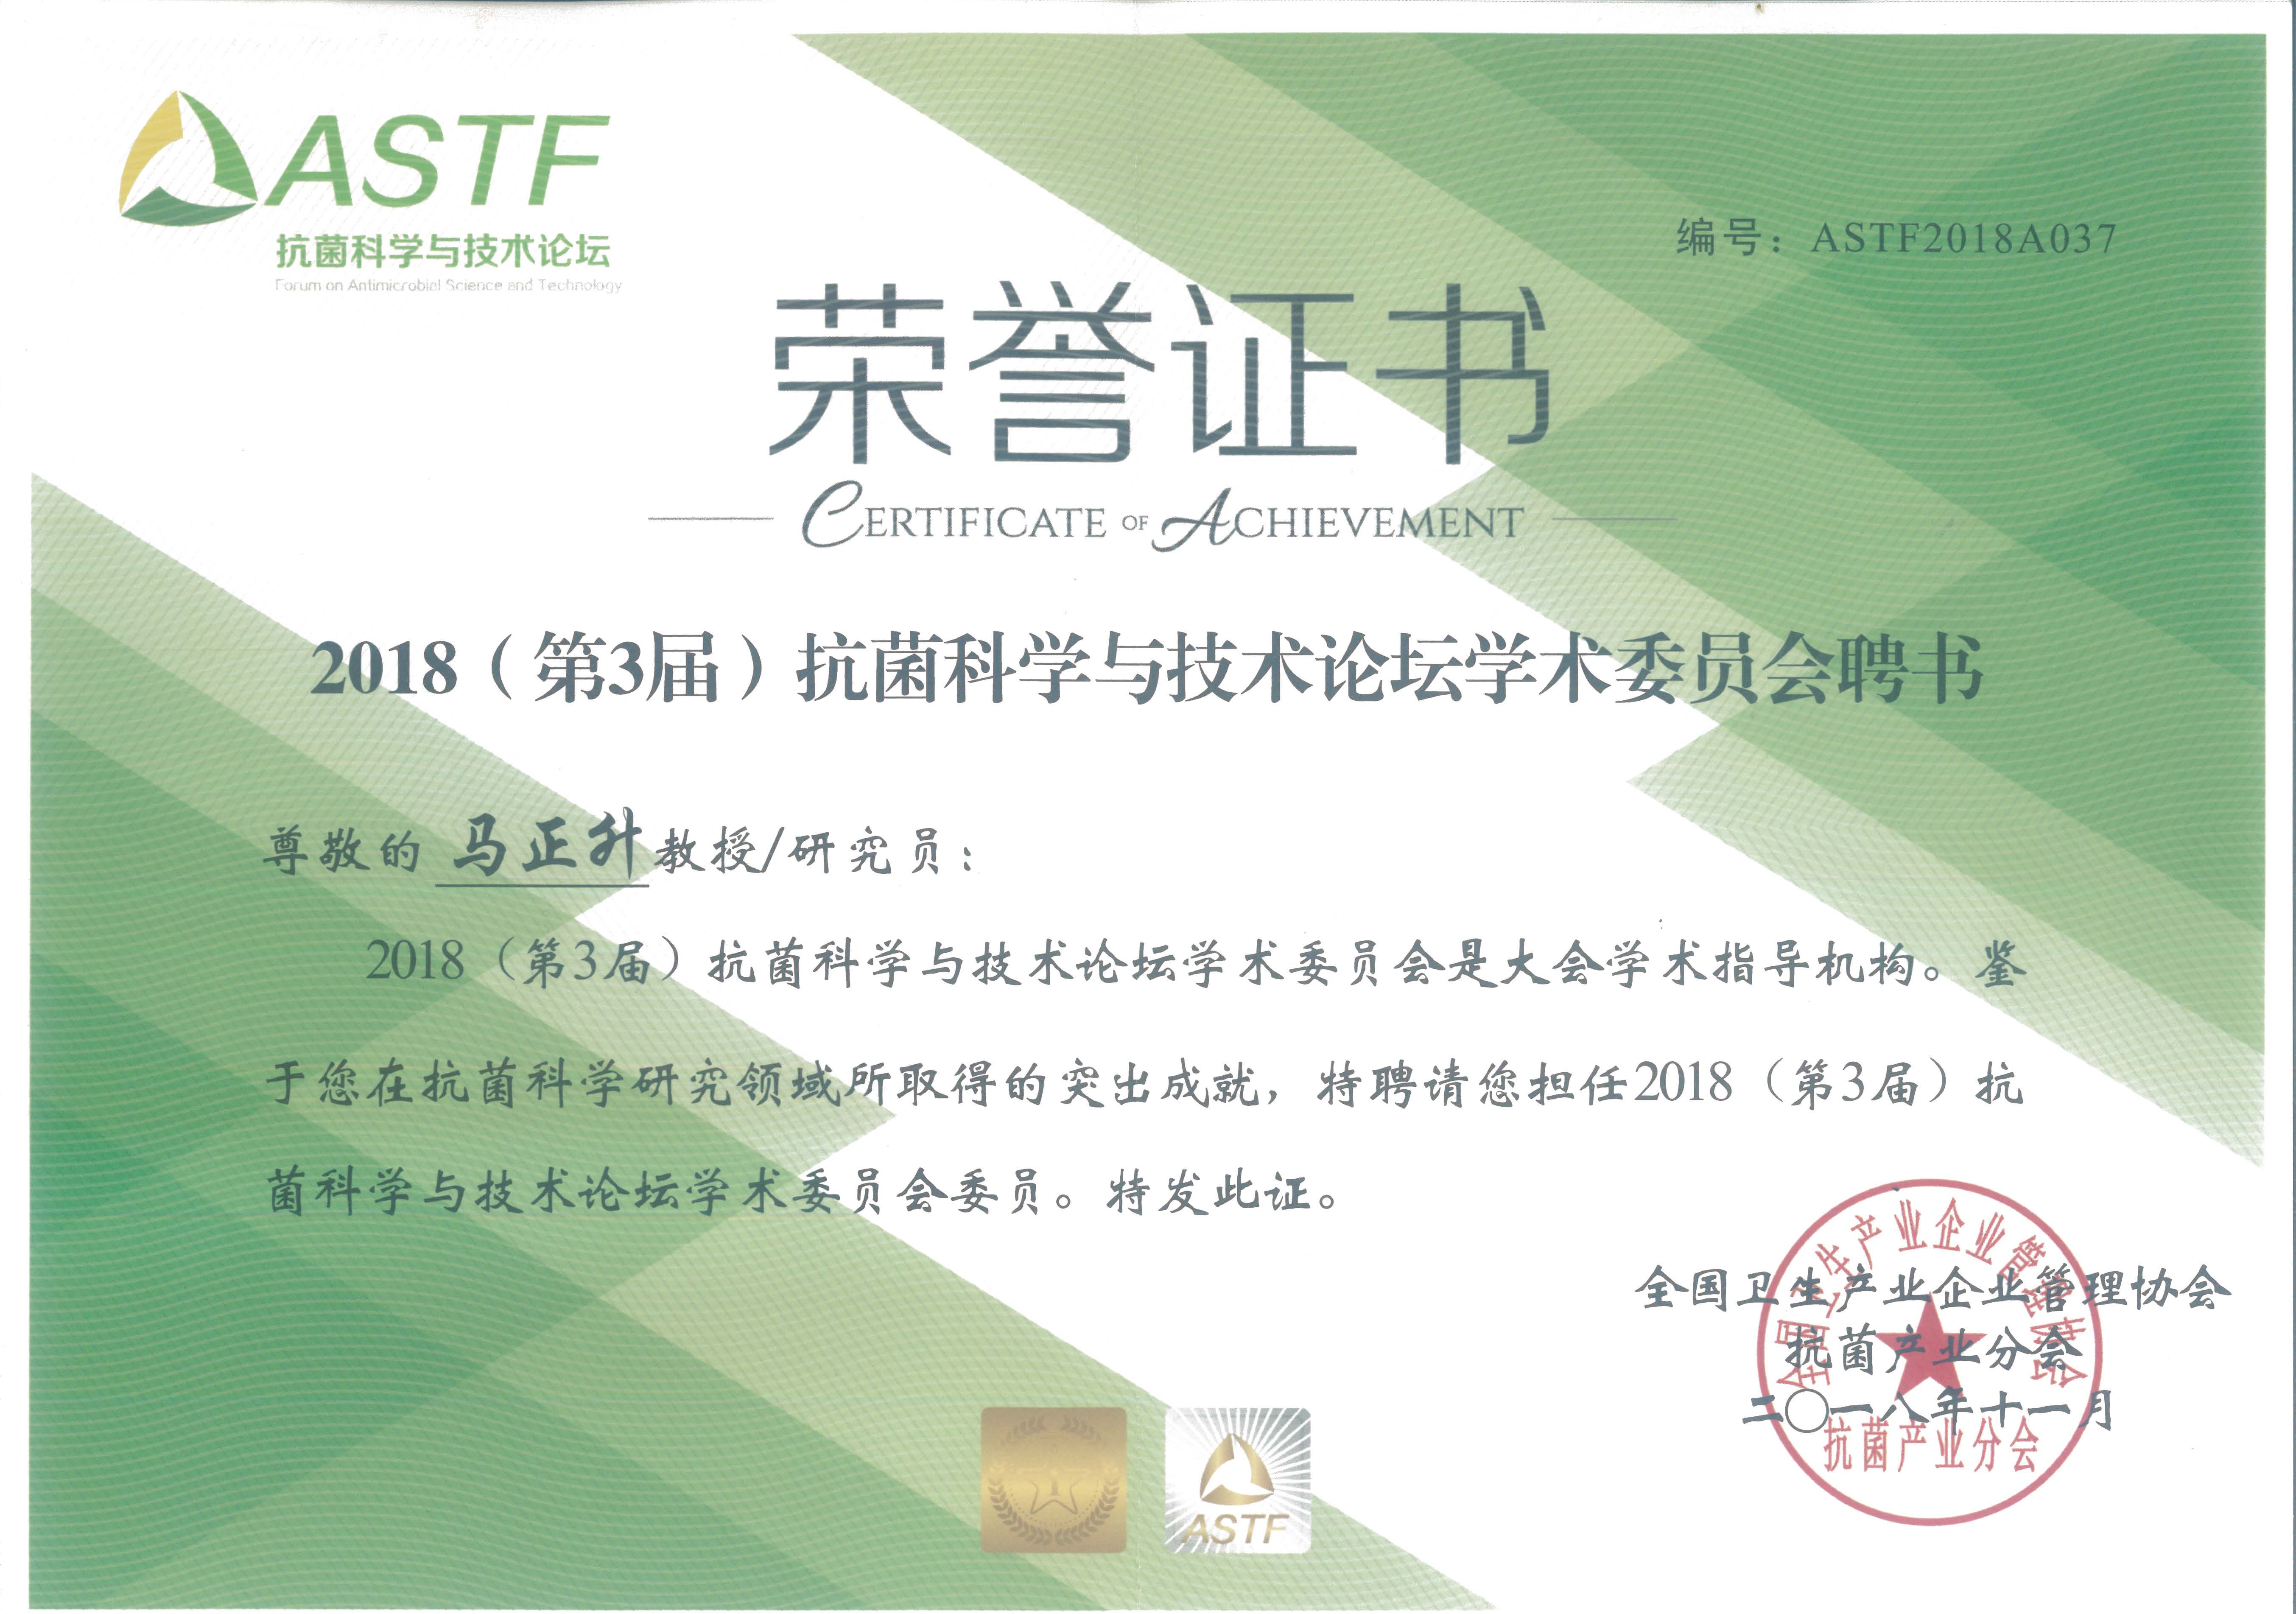 Member of Academic Committee of Antibacterial Science and Technology Forum 